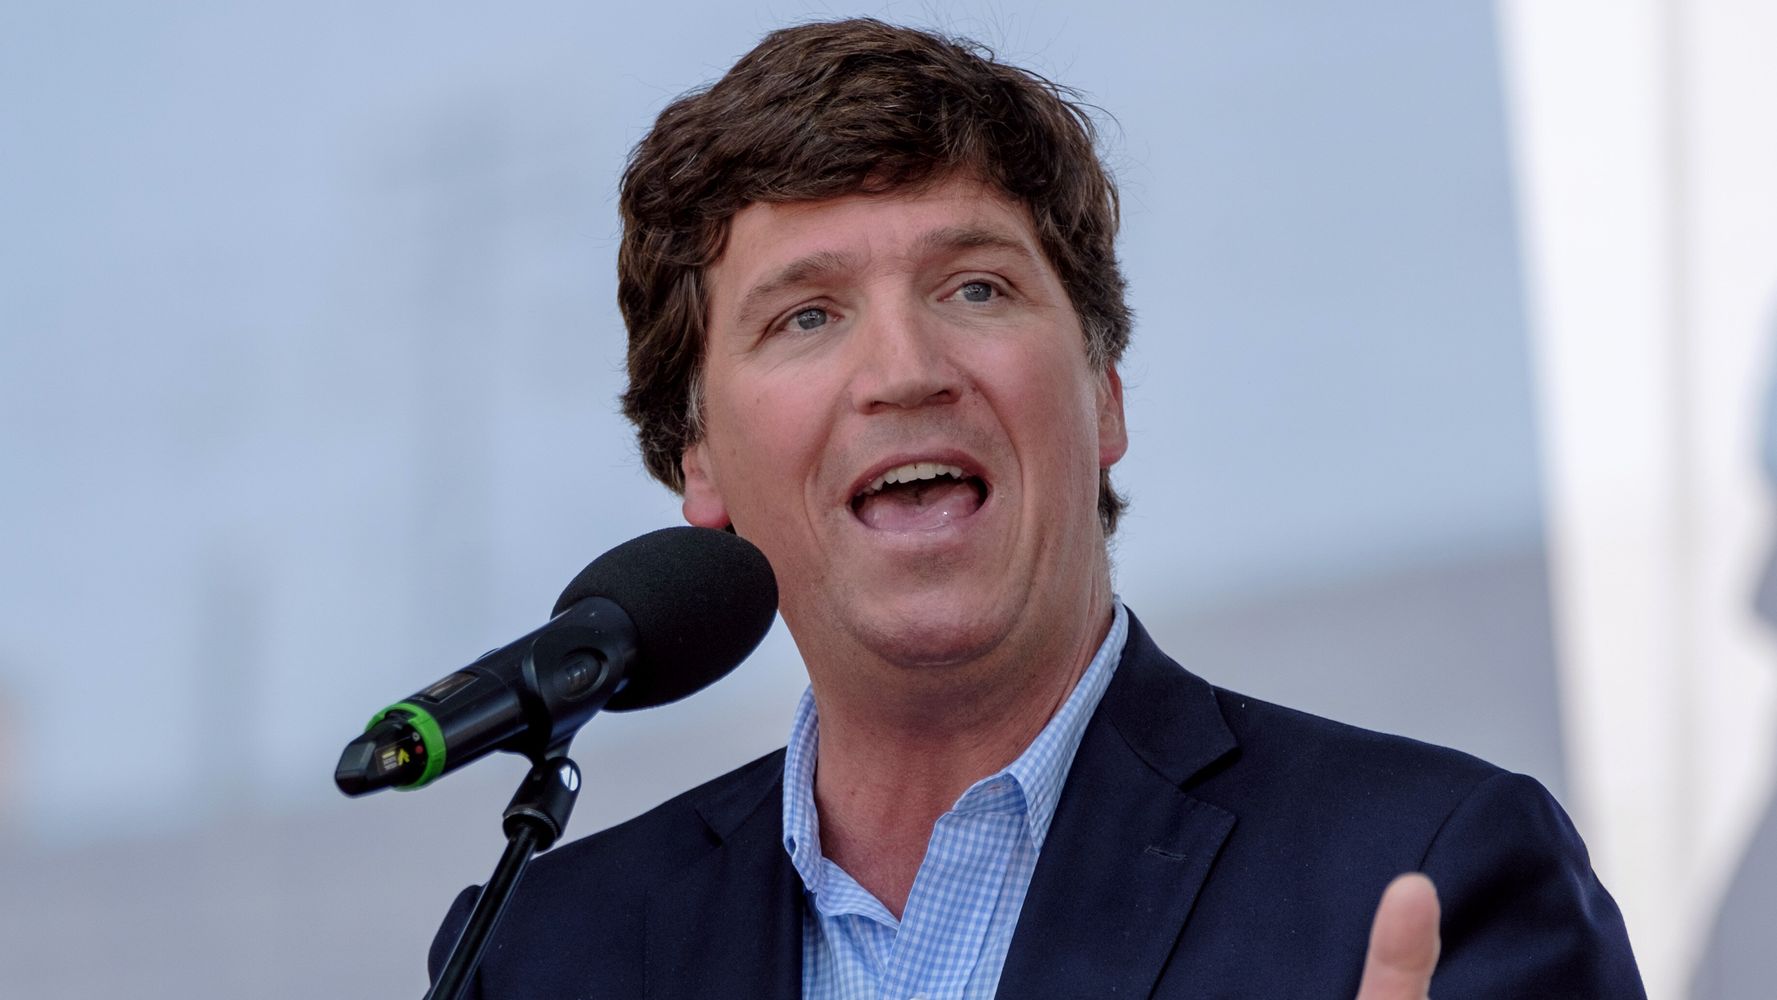 Tucker Carlson Finally Talks About His Vaccination Status